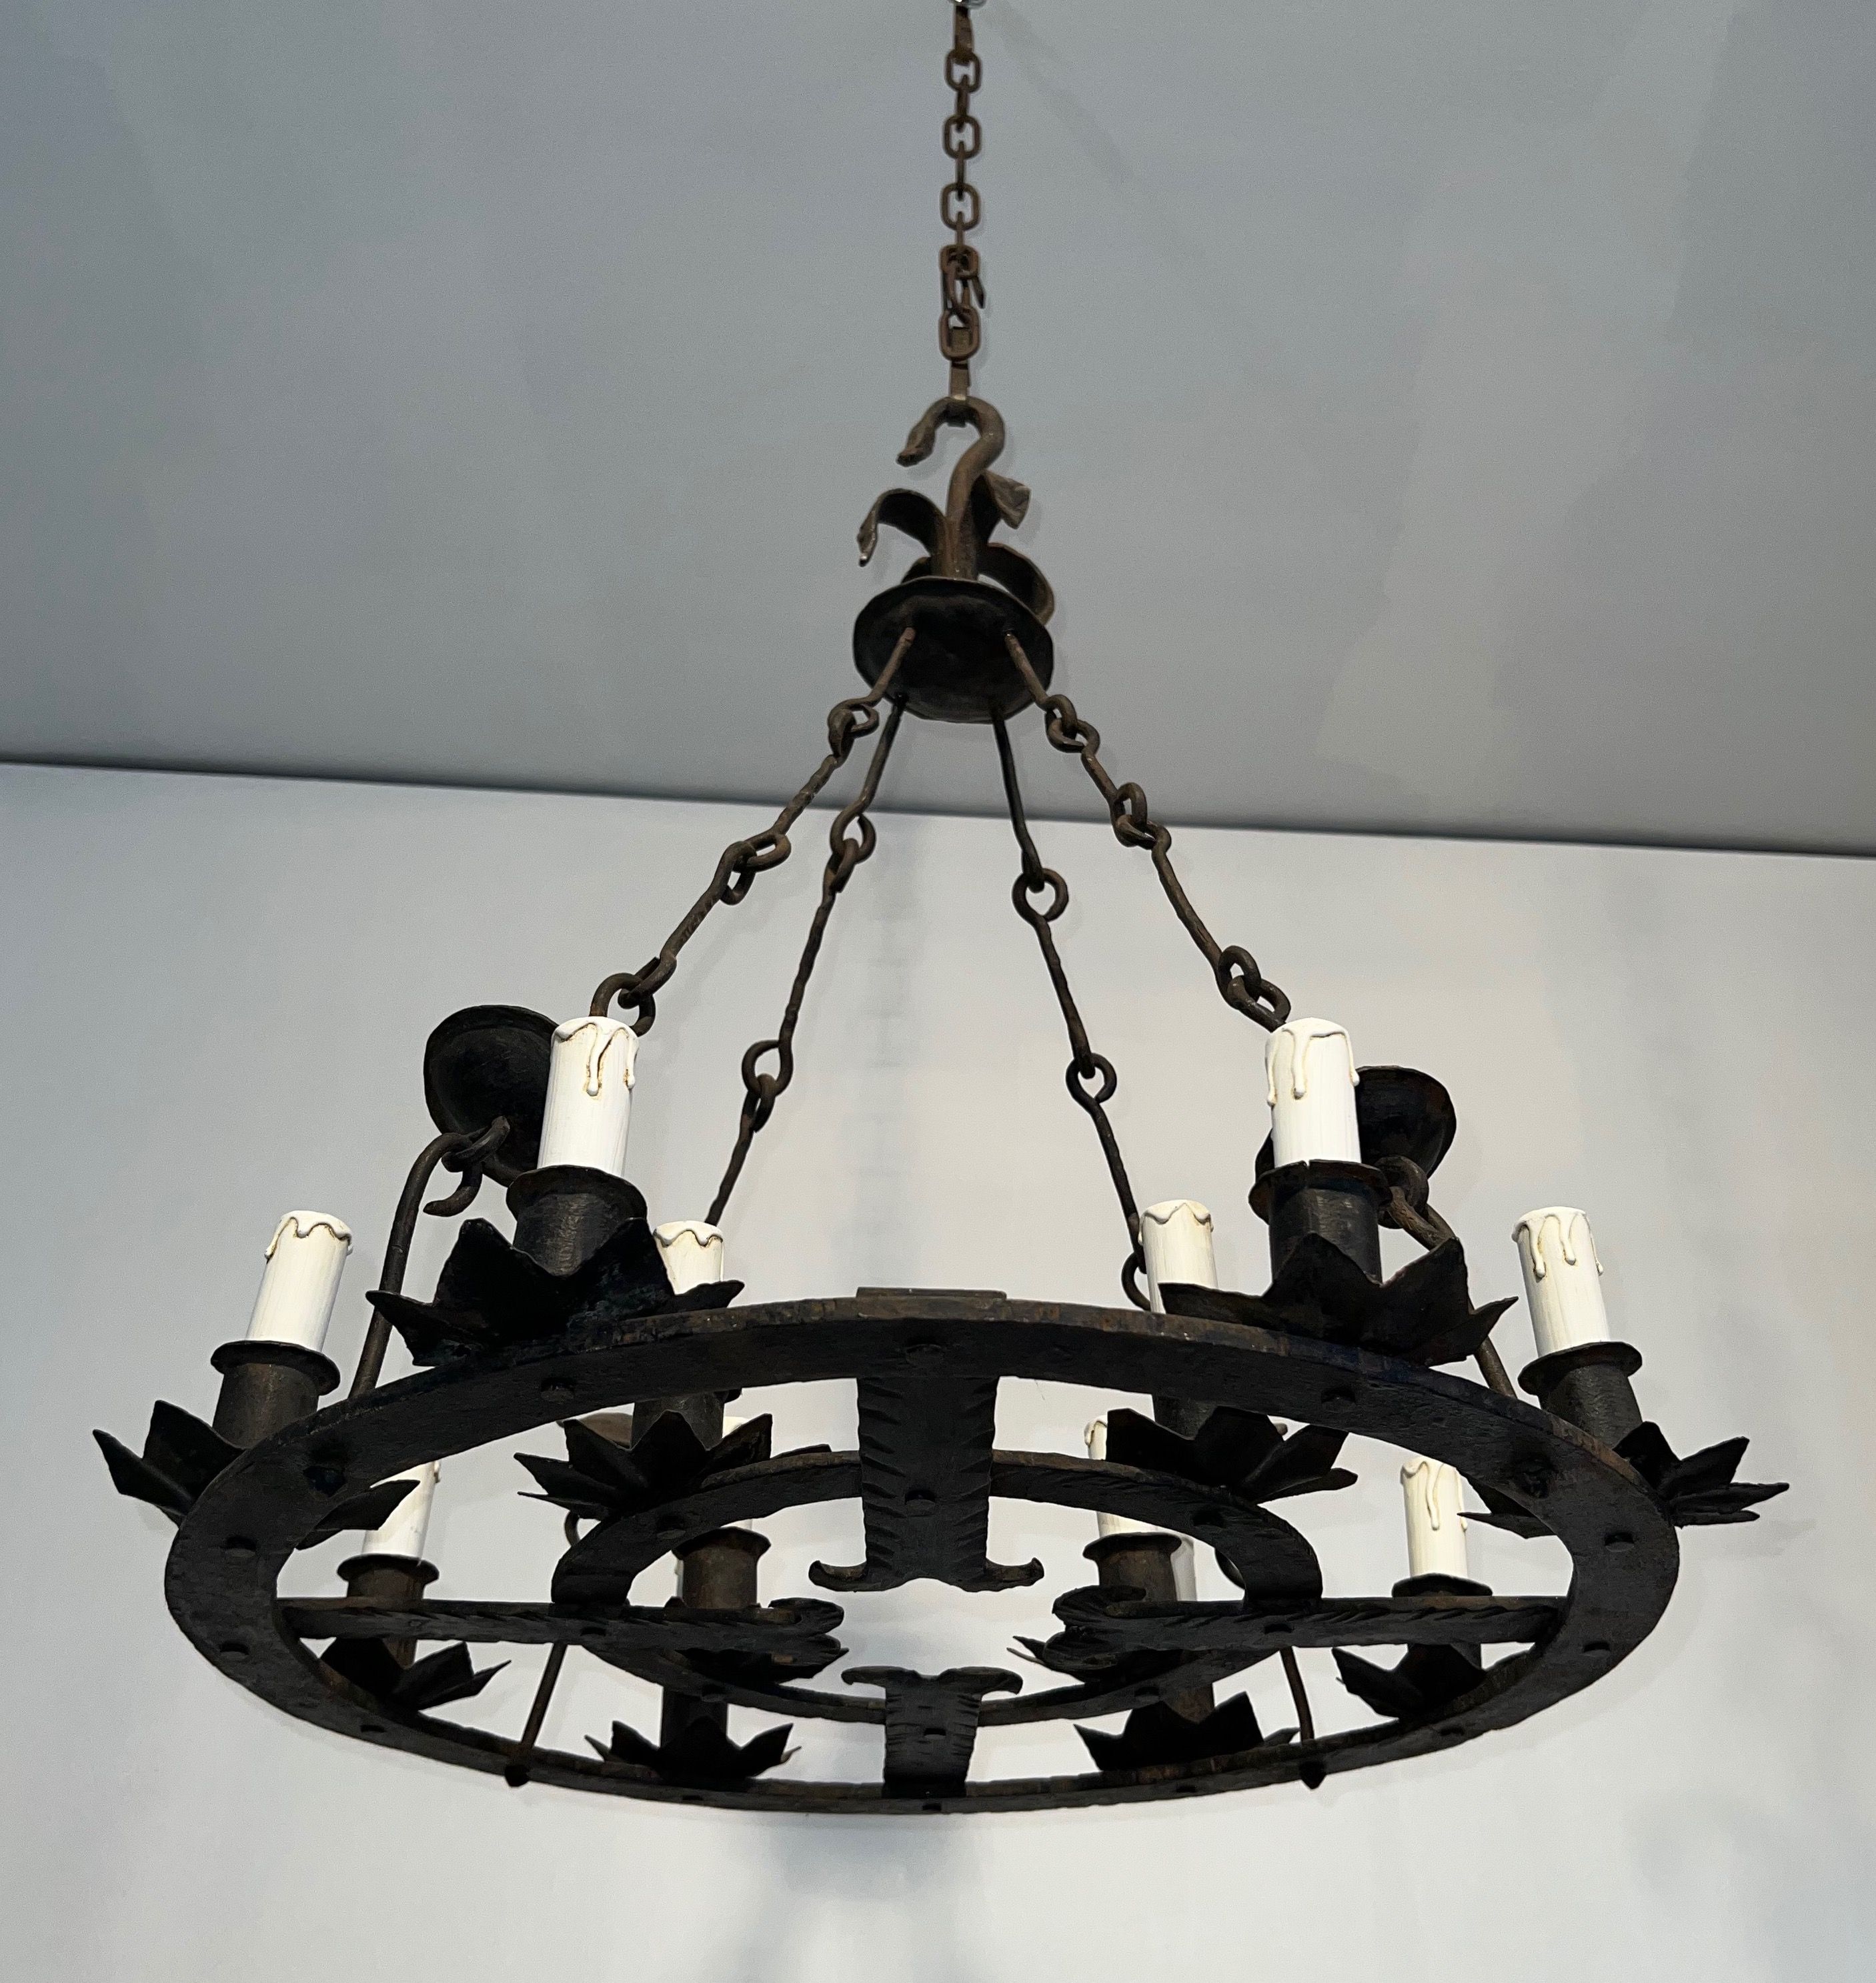 Wrought Iron Chandelier with 12 Lights in the Gothic Style. Circa 1950